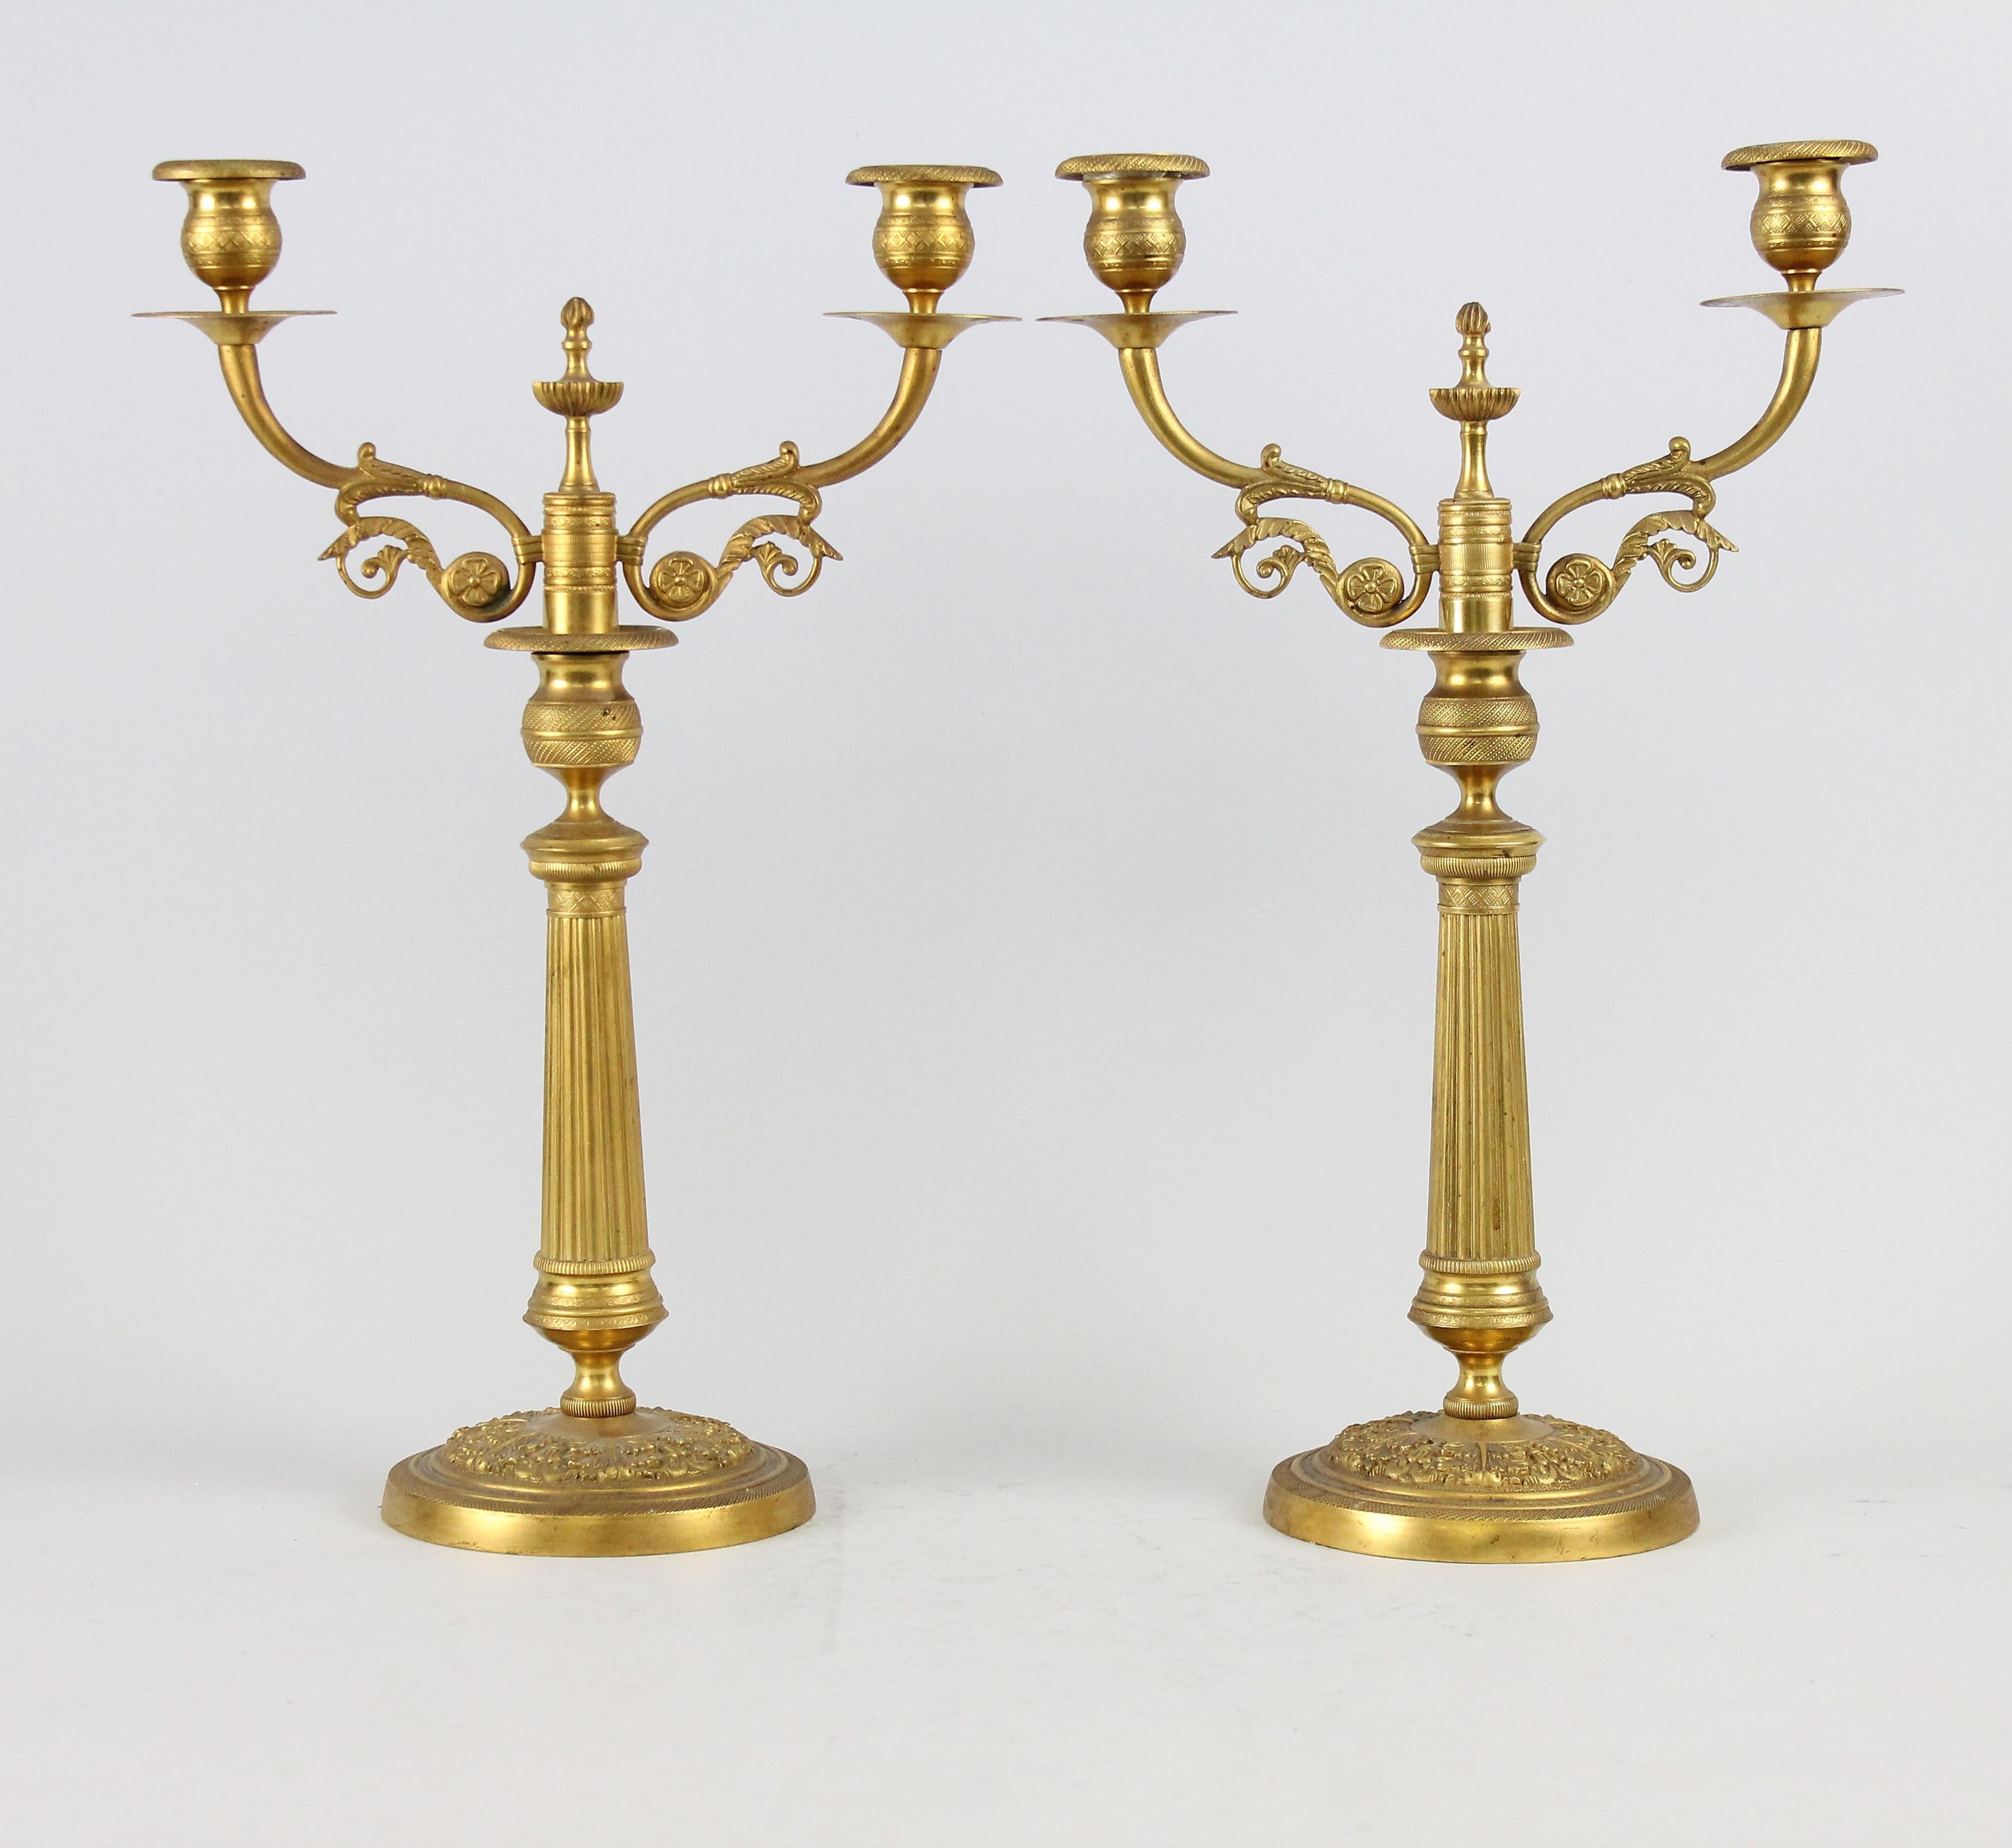 Empire Pair of 19th Century Bronze Candelabras For Sale